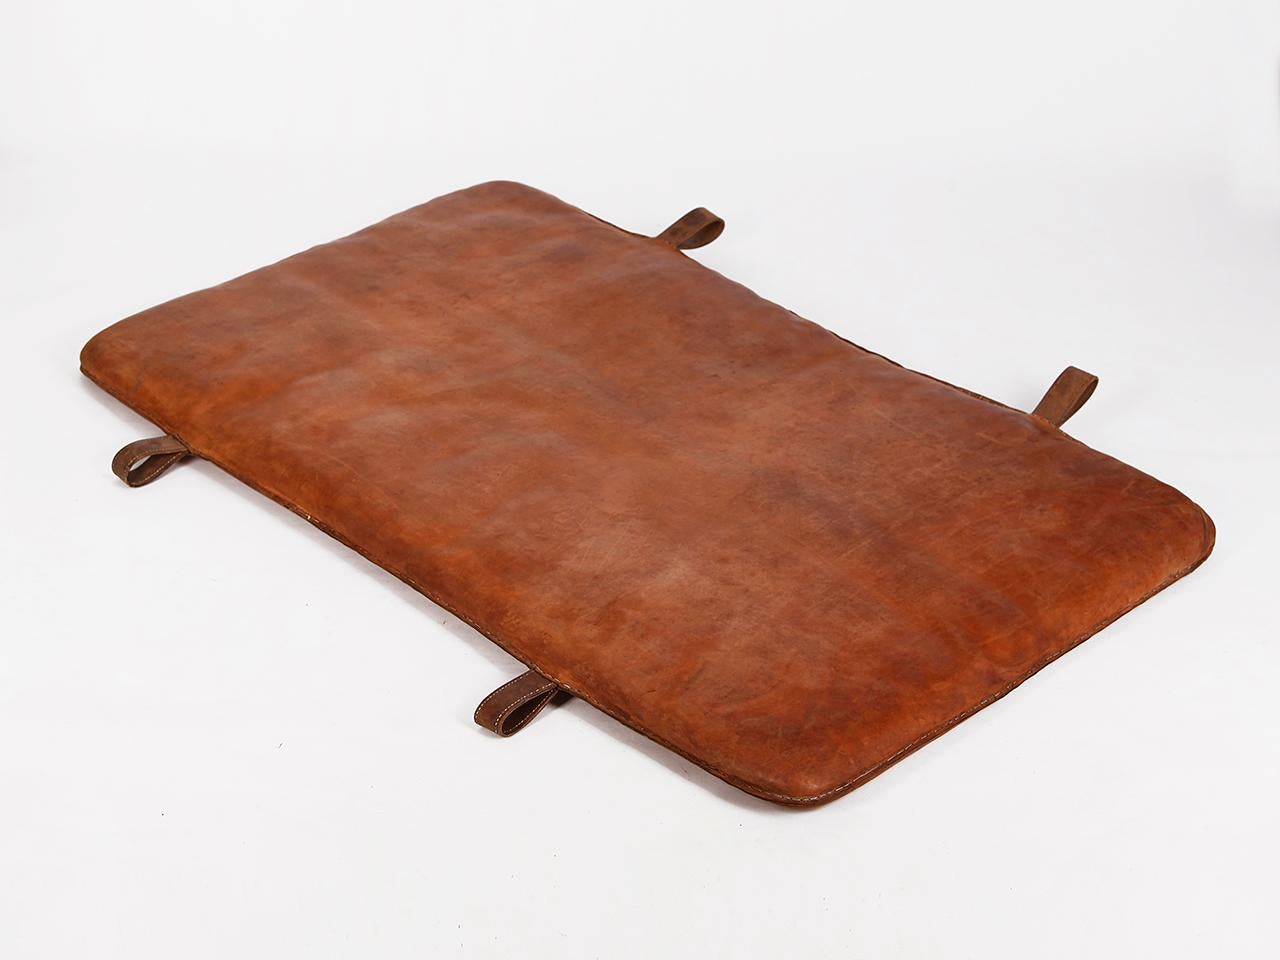 This 1930s gym mat originates from former Czechoslovakia. The thick leather has been cleaned and preserved and features a very good patina. The mat is in a very good condition. All of our premium vintage gym equipment has been carefully and